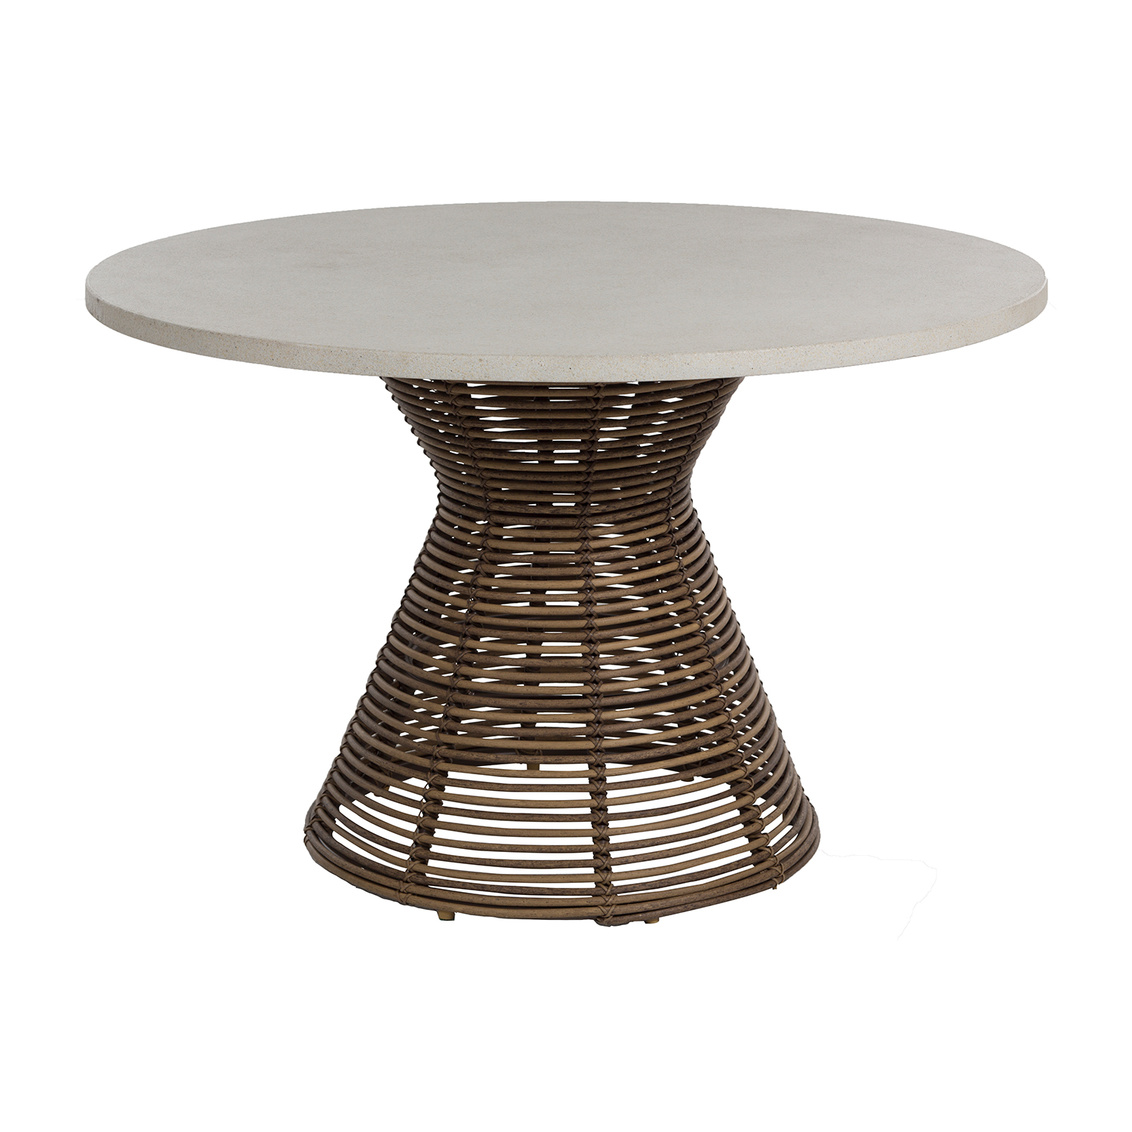 harris round dining table in travertine superstone top (w/ umbrella hole) and raffia woven base product image